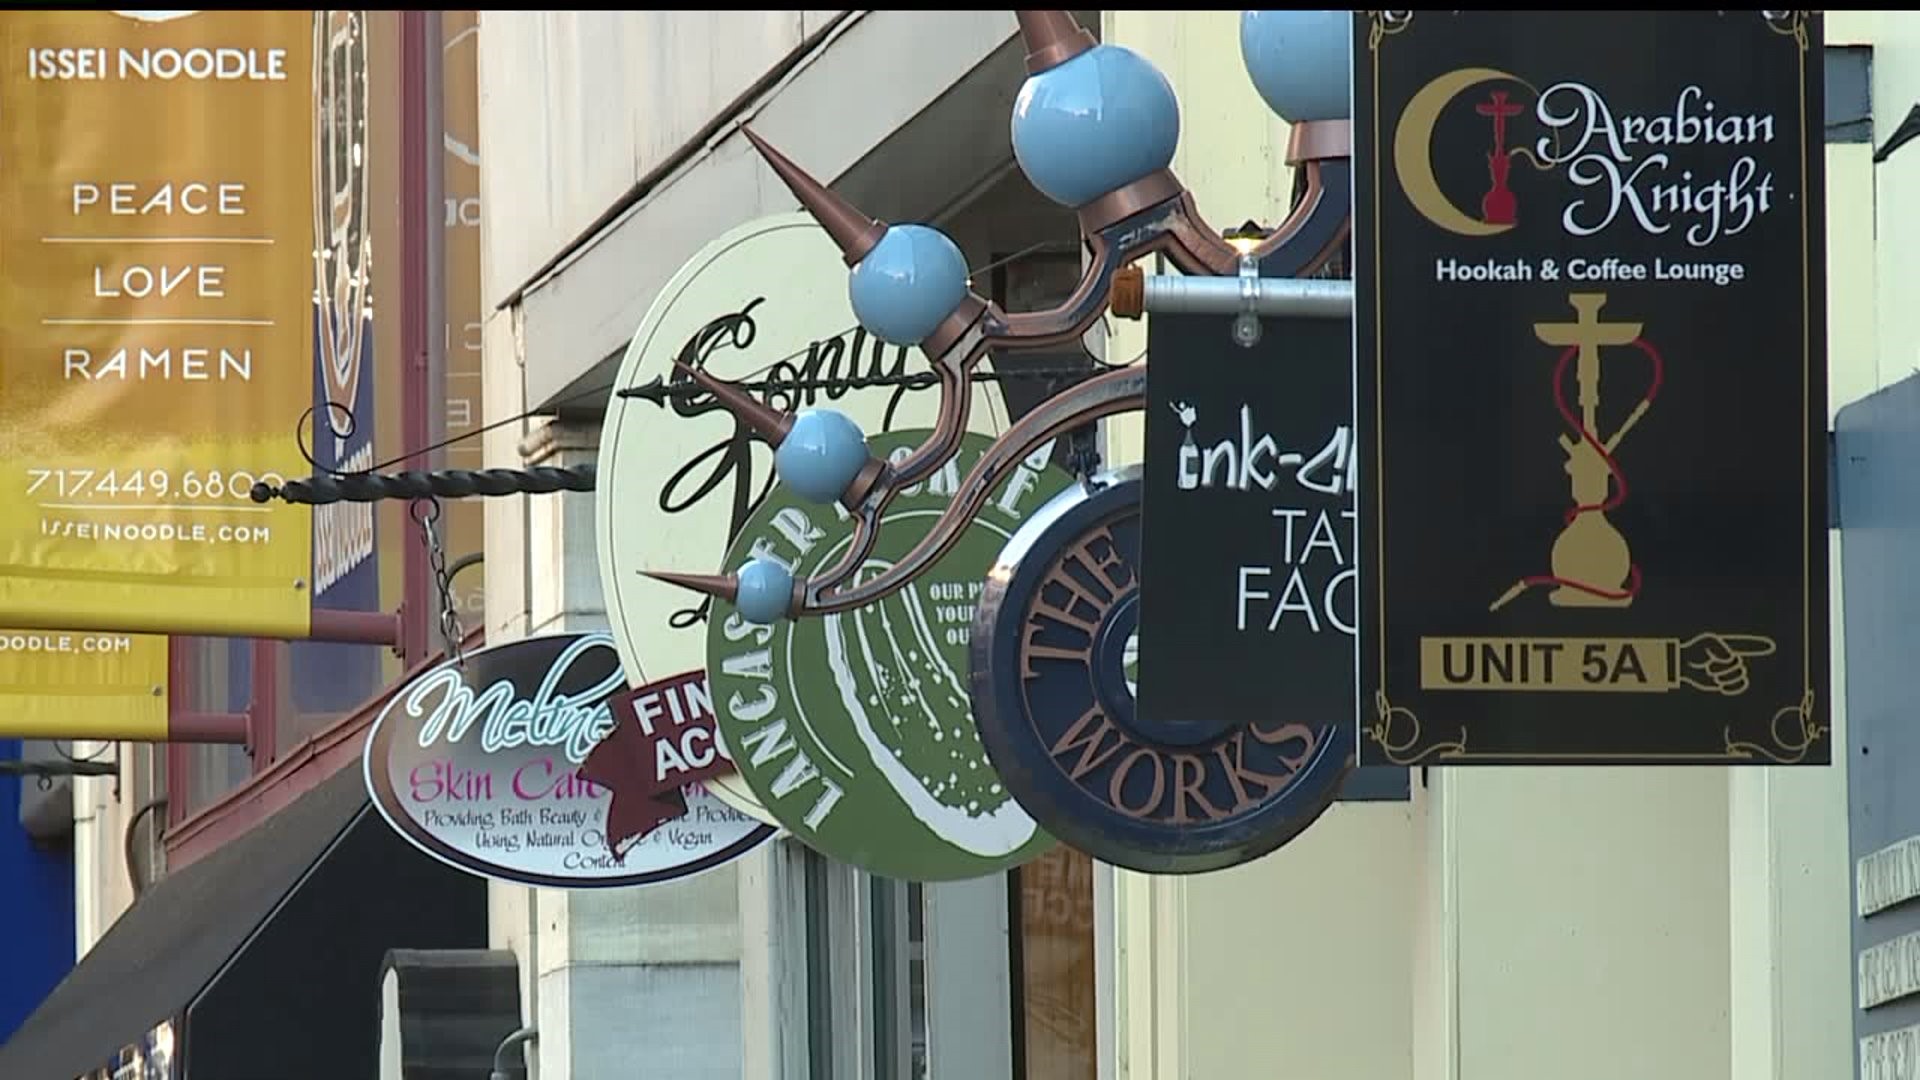 Taking part in Small Business Saturday in Lancaster could win you $100